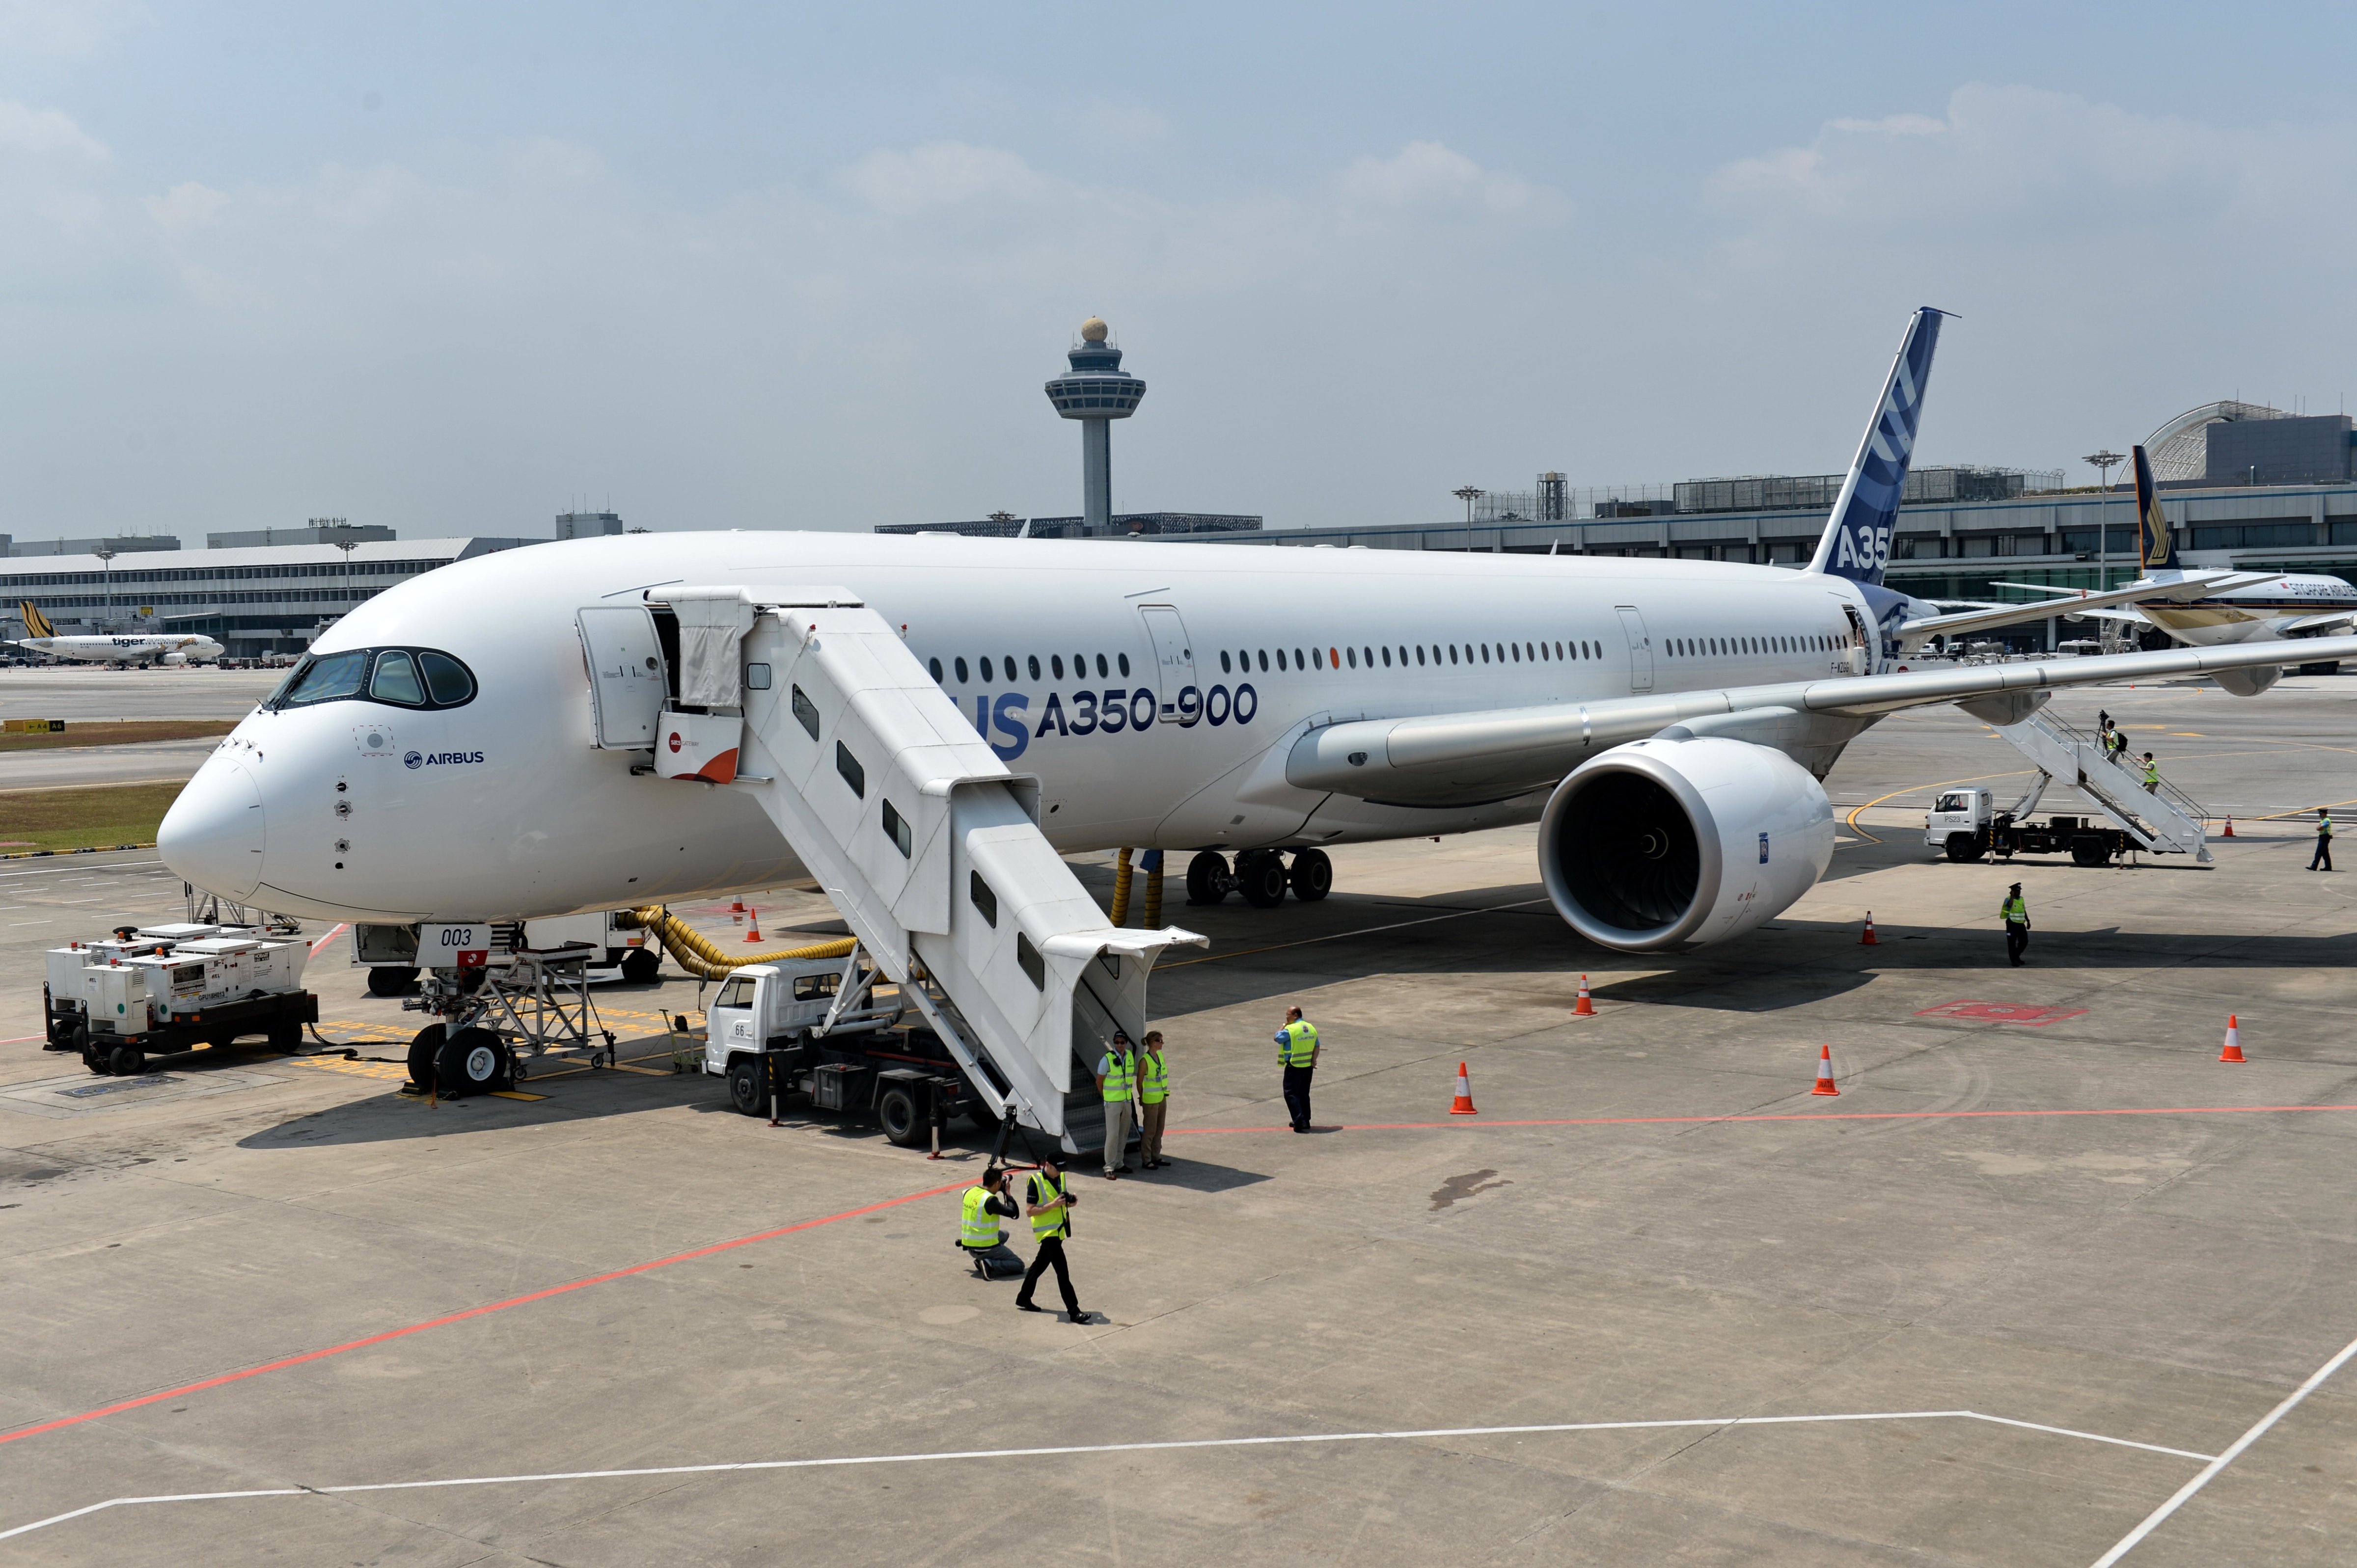 An Airbus A350-900 sits on the tarmac during a media preview at Changi Interational Airport ahead of the Singapore Airshow on Feb. 10, 2014. (Roslan Rahman / AFP / Getty Images)